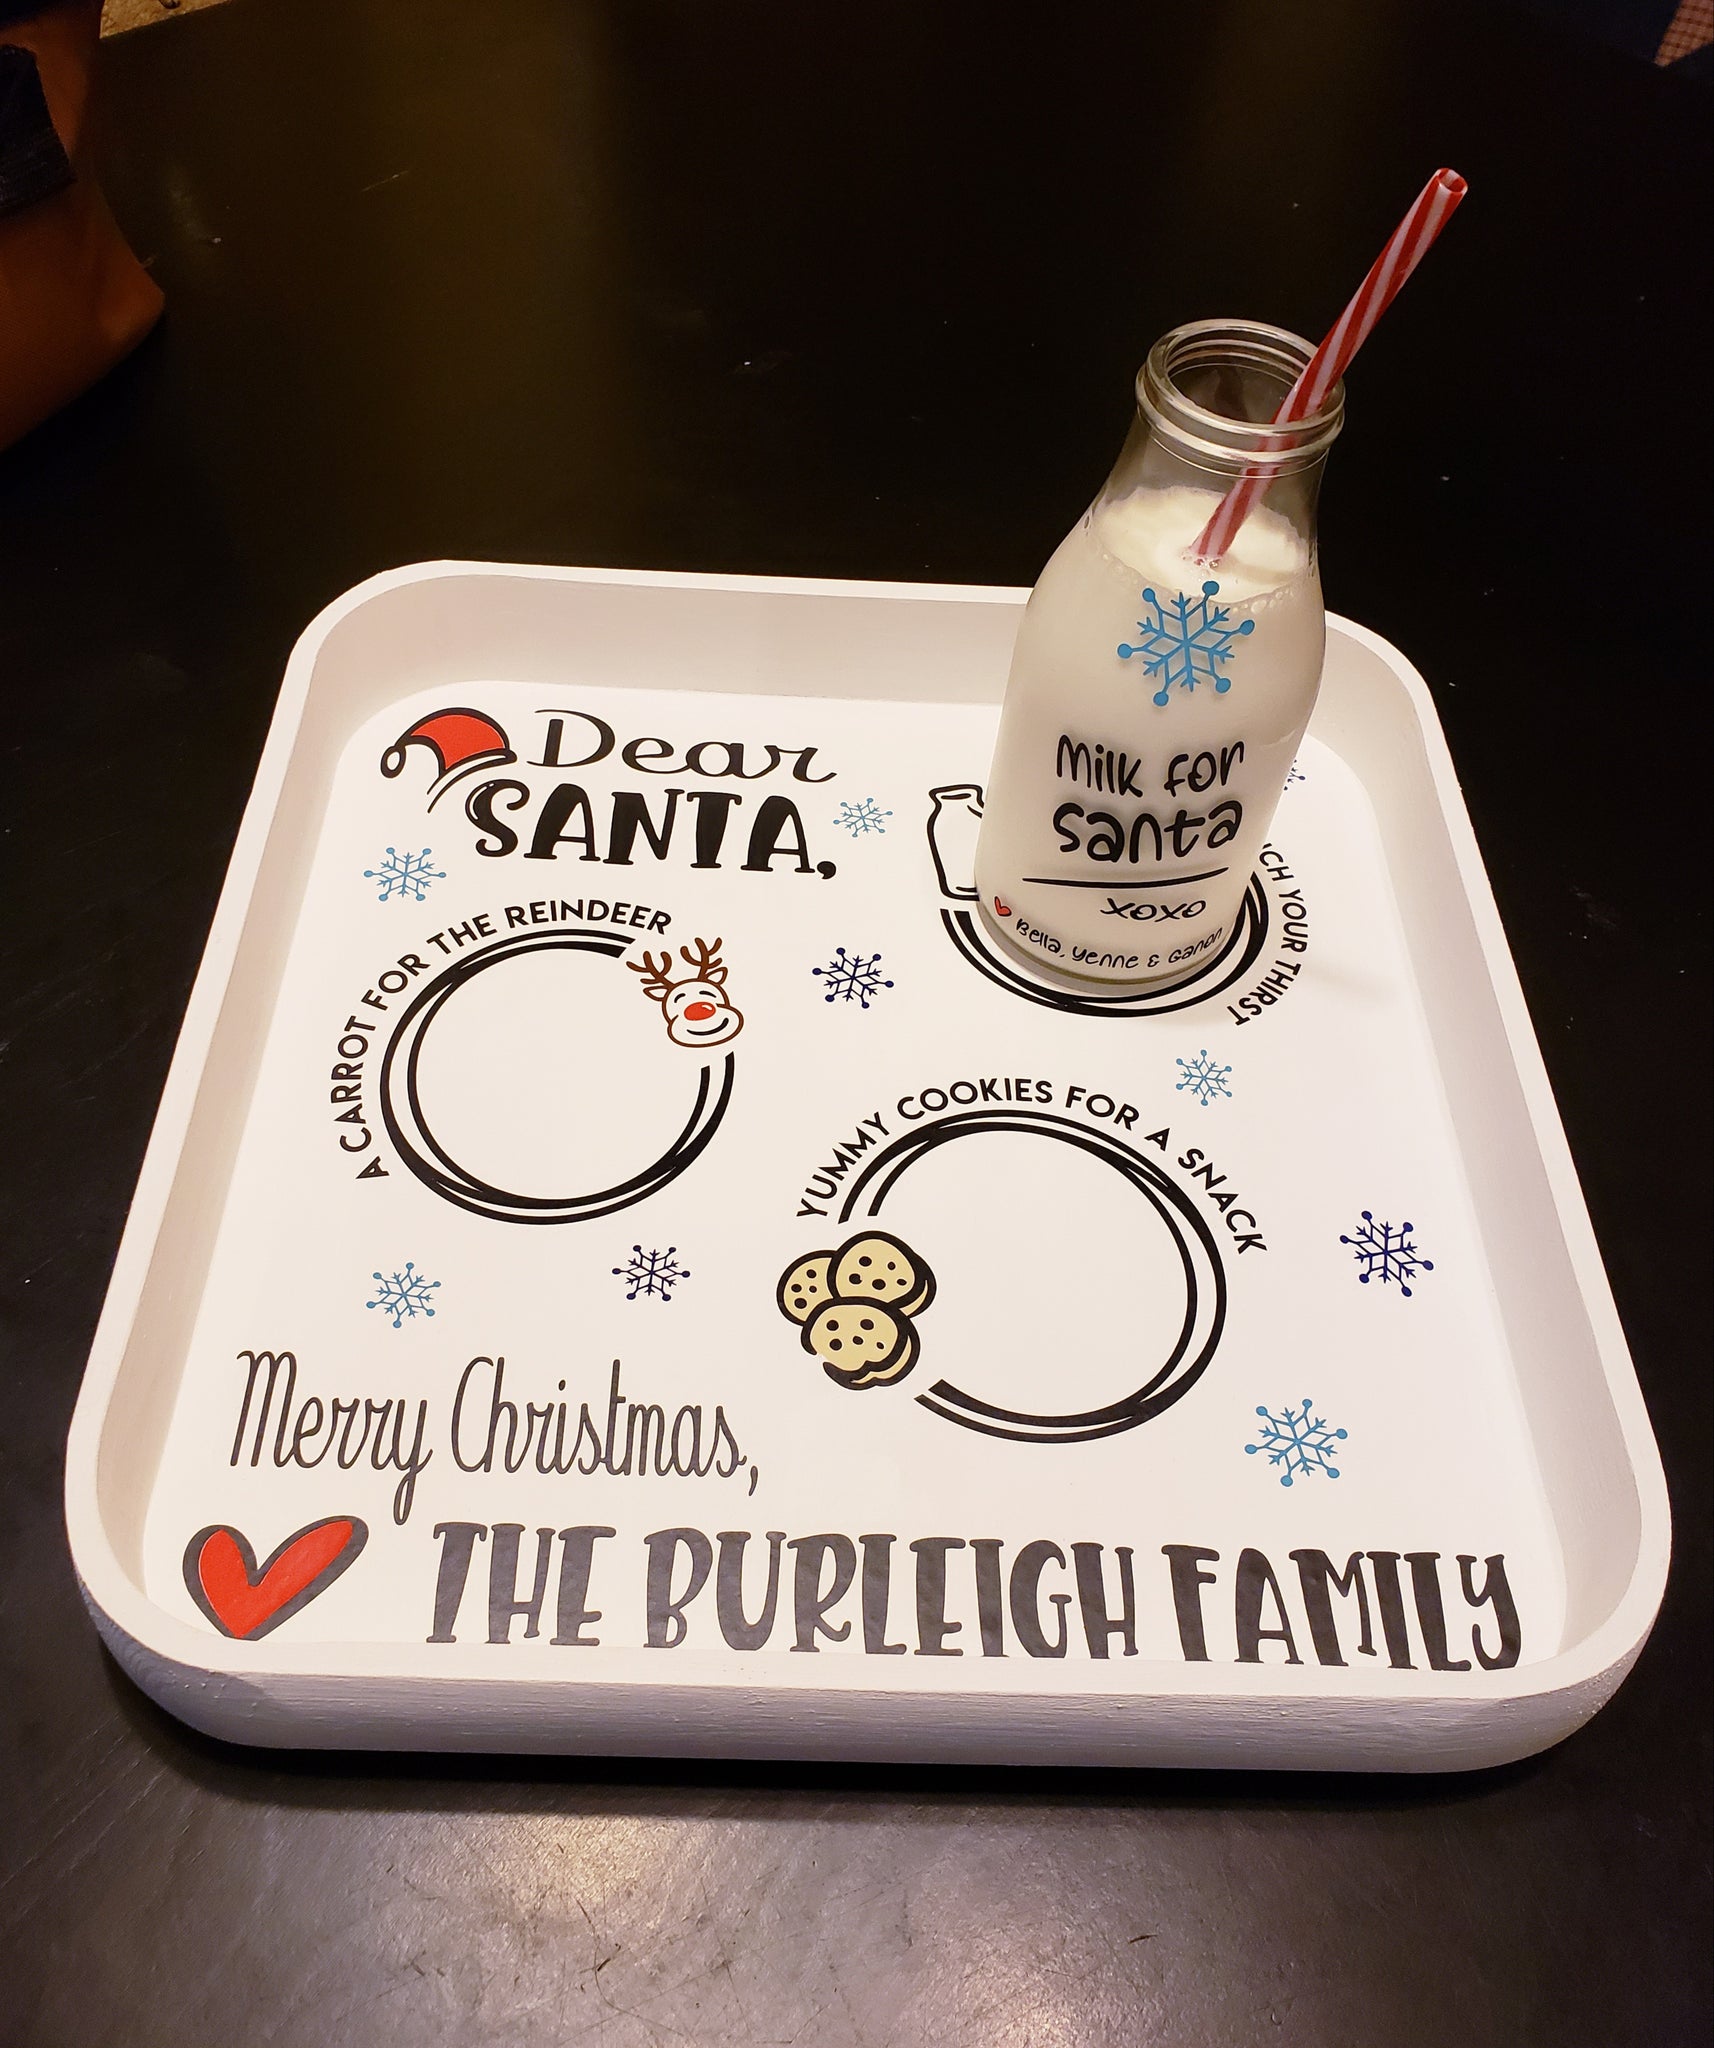 This beautiful hand-painted Santa Tray Set is perfect for keeping your Christmas spirit alive! This personalized set includes a 12 x 12 tray and a 15 oz glass milk bottle. Personalize it with your family last name and up to 3 children's names - it will be a cherished family heirloom for years to come. Delivery of your set is estimated to take 5 to 7 days.